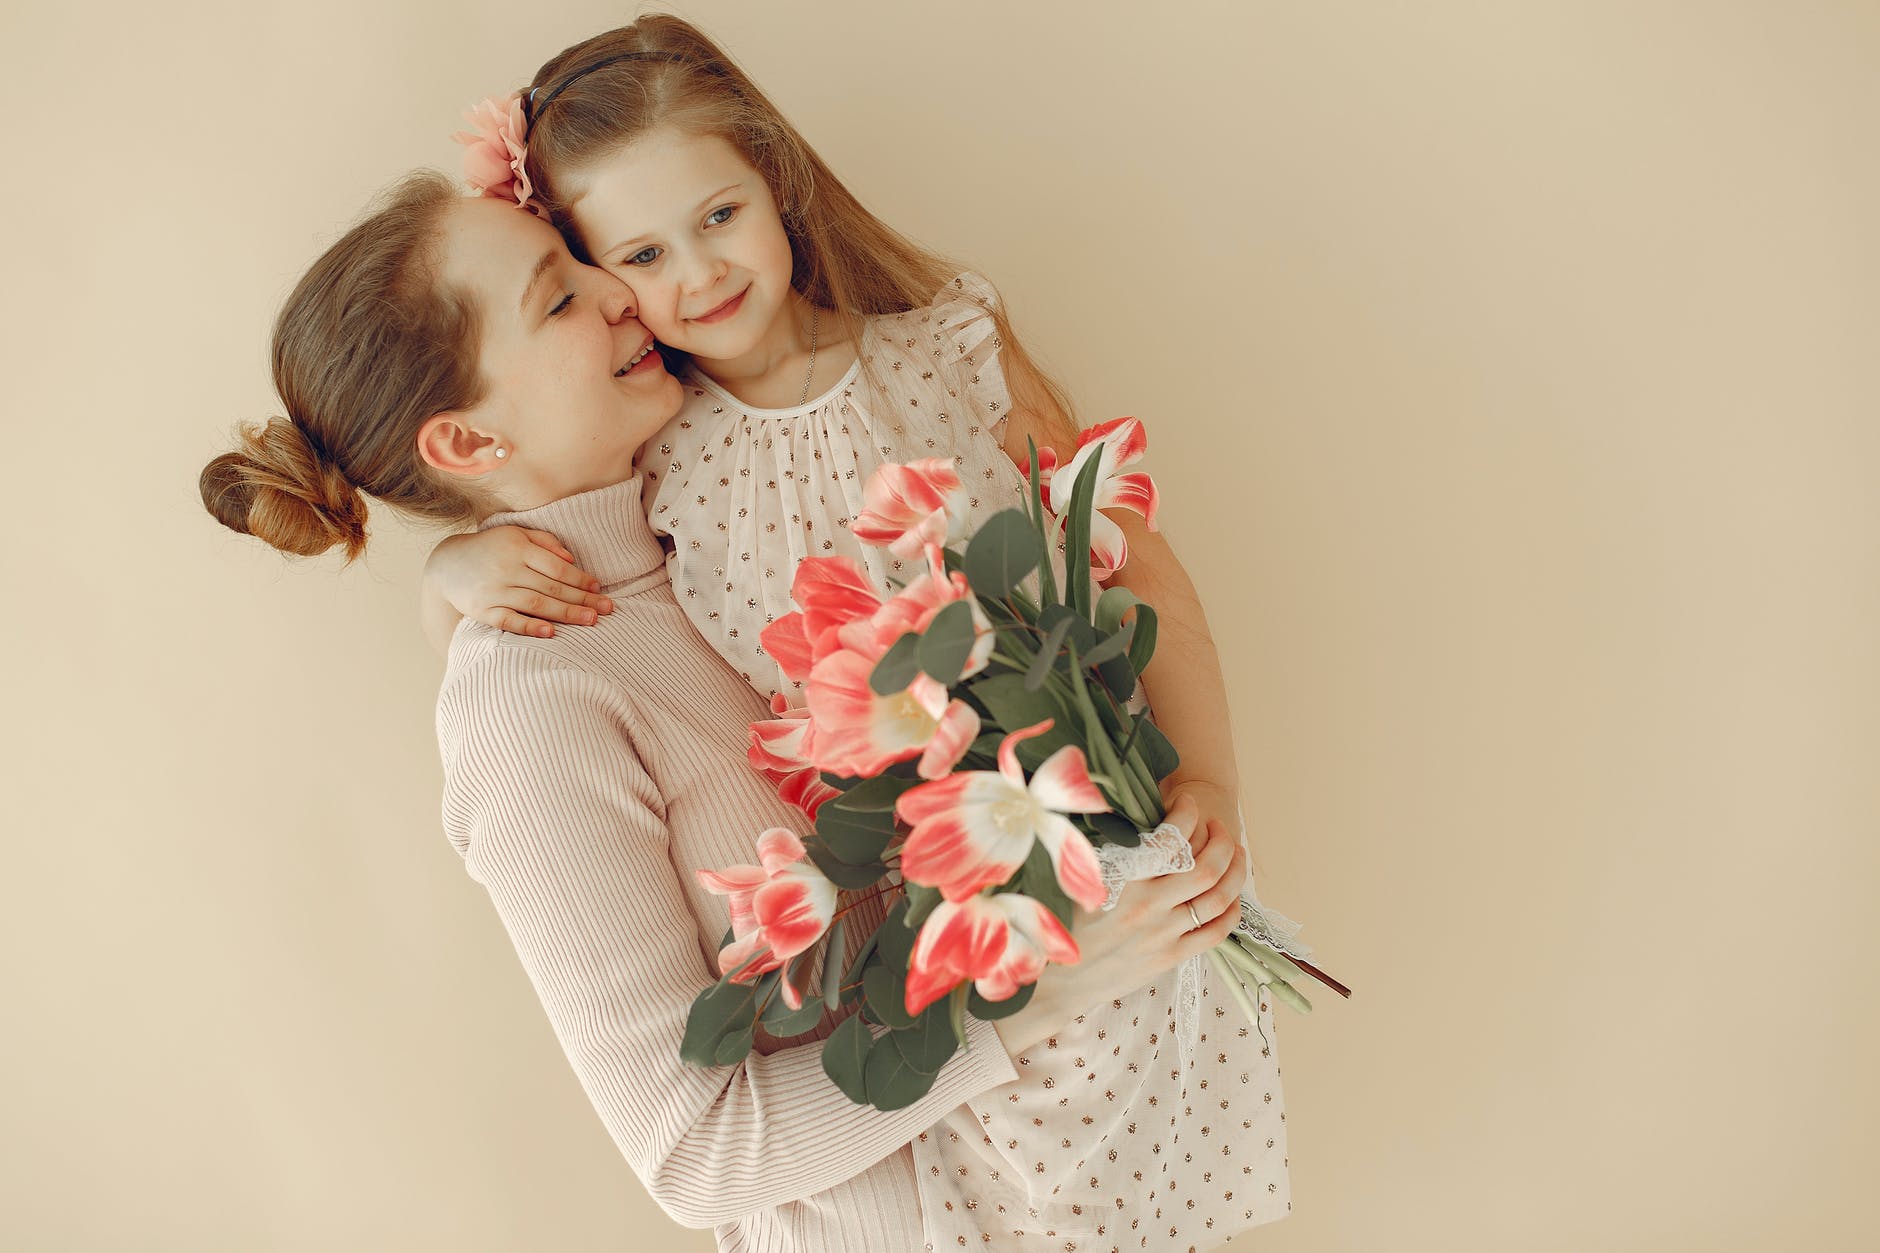 A mother presses her nose to her daughter's cheek, eyes closed. They stand in front of a pink background, holding matching pink flowers.